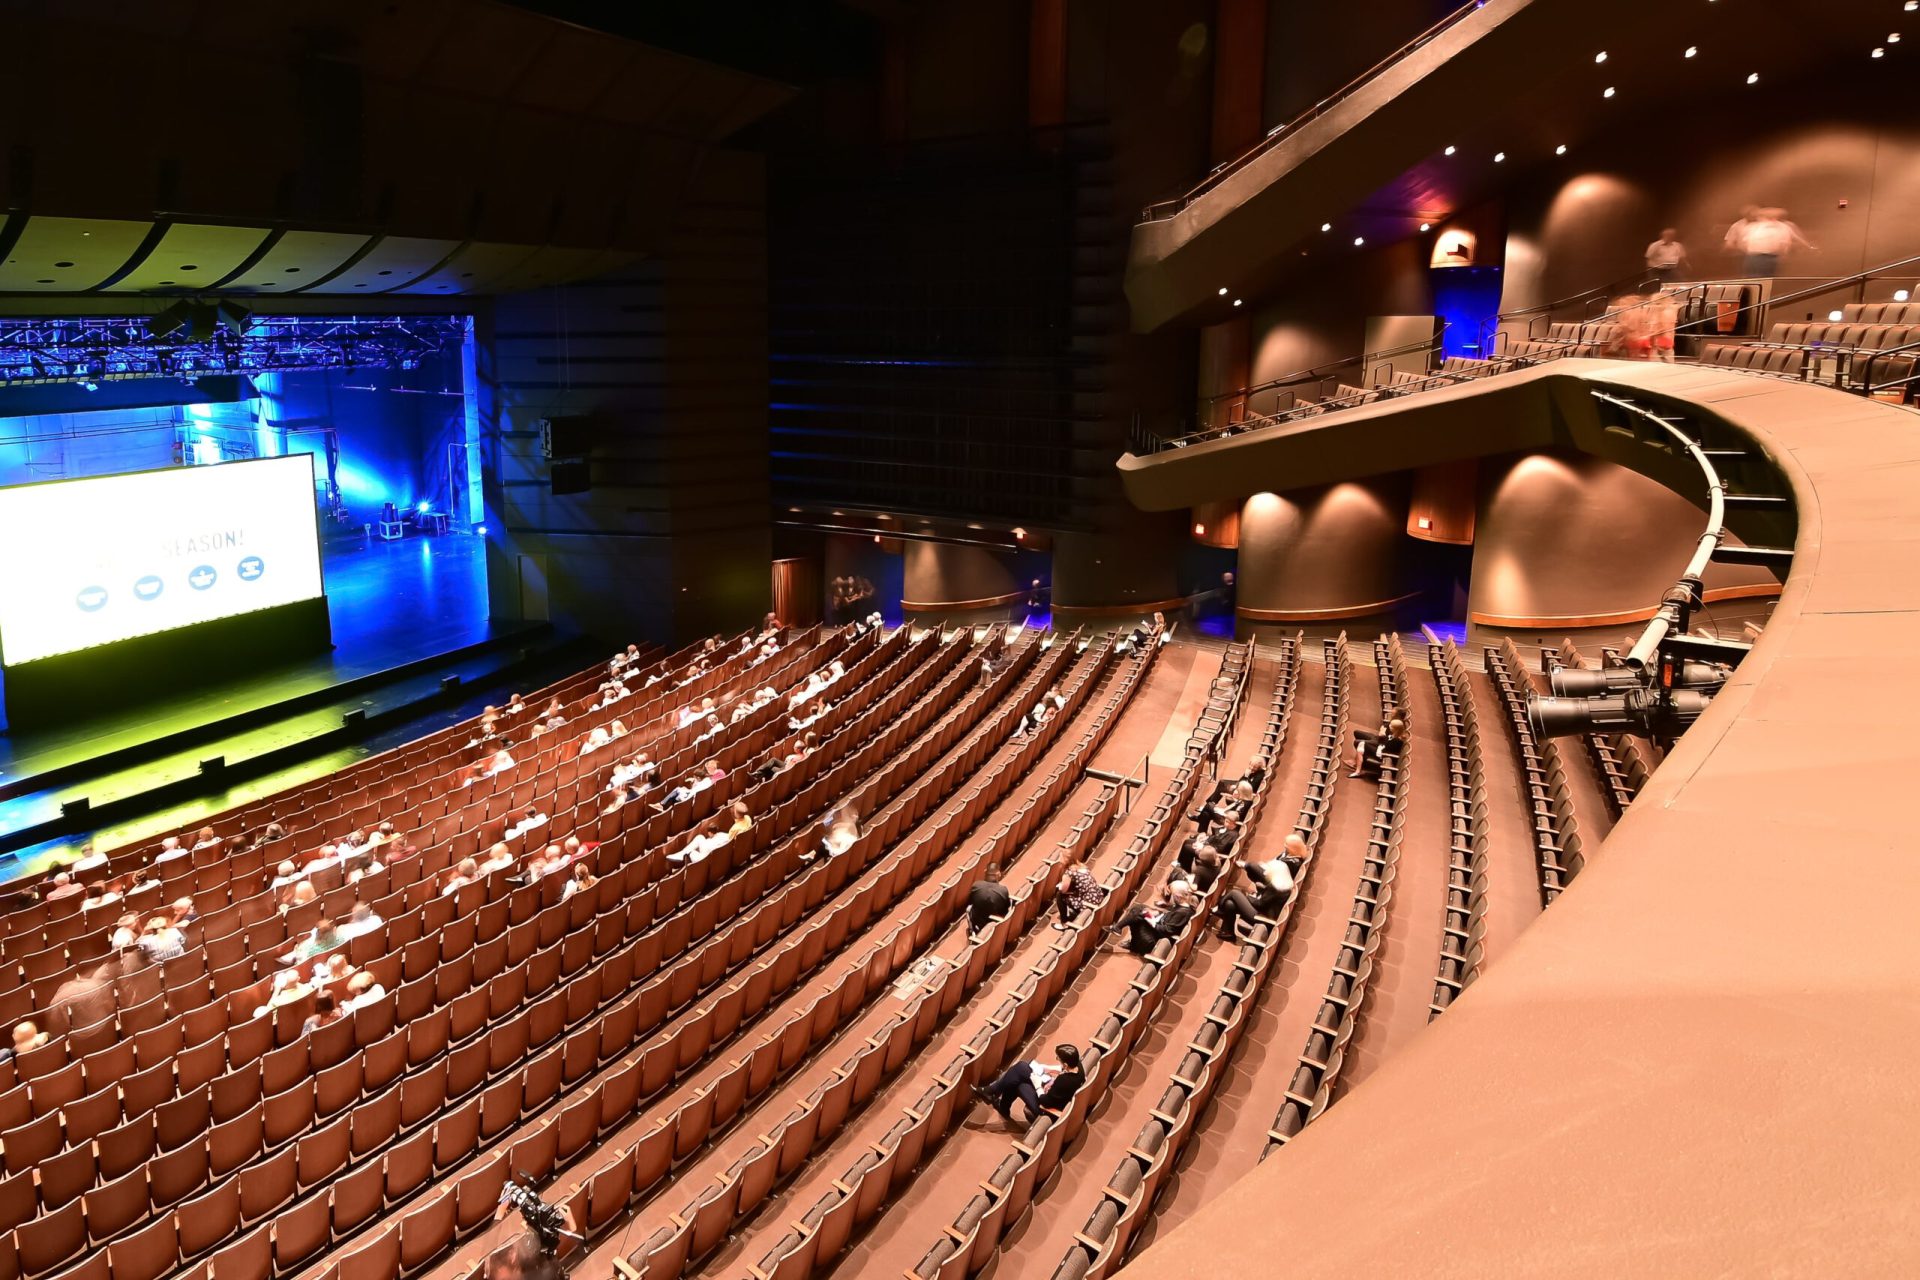 View from the balcony at Bass Concert Hall, showcasing the expansive auditorium and stage.